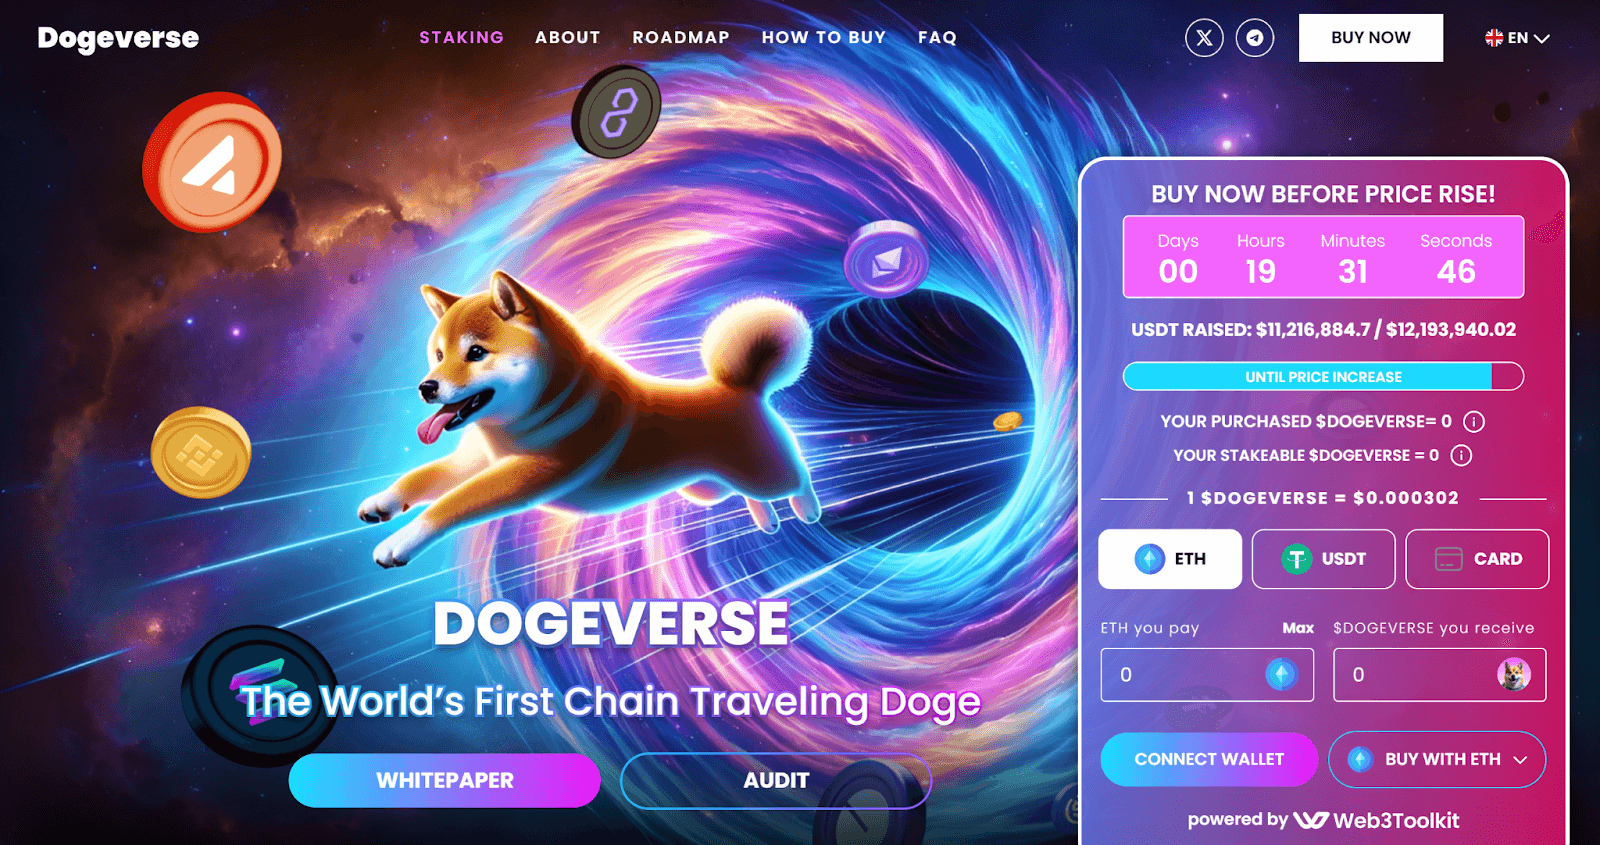 Dogeverse Breaks $11 Million in Crypto Presale, Integrates with Solana